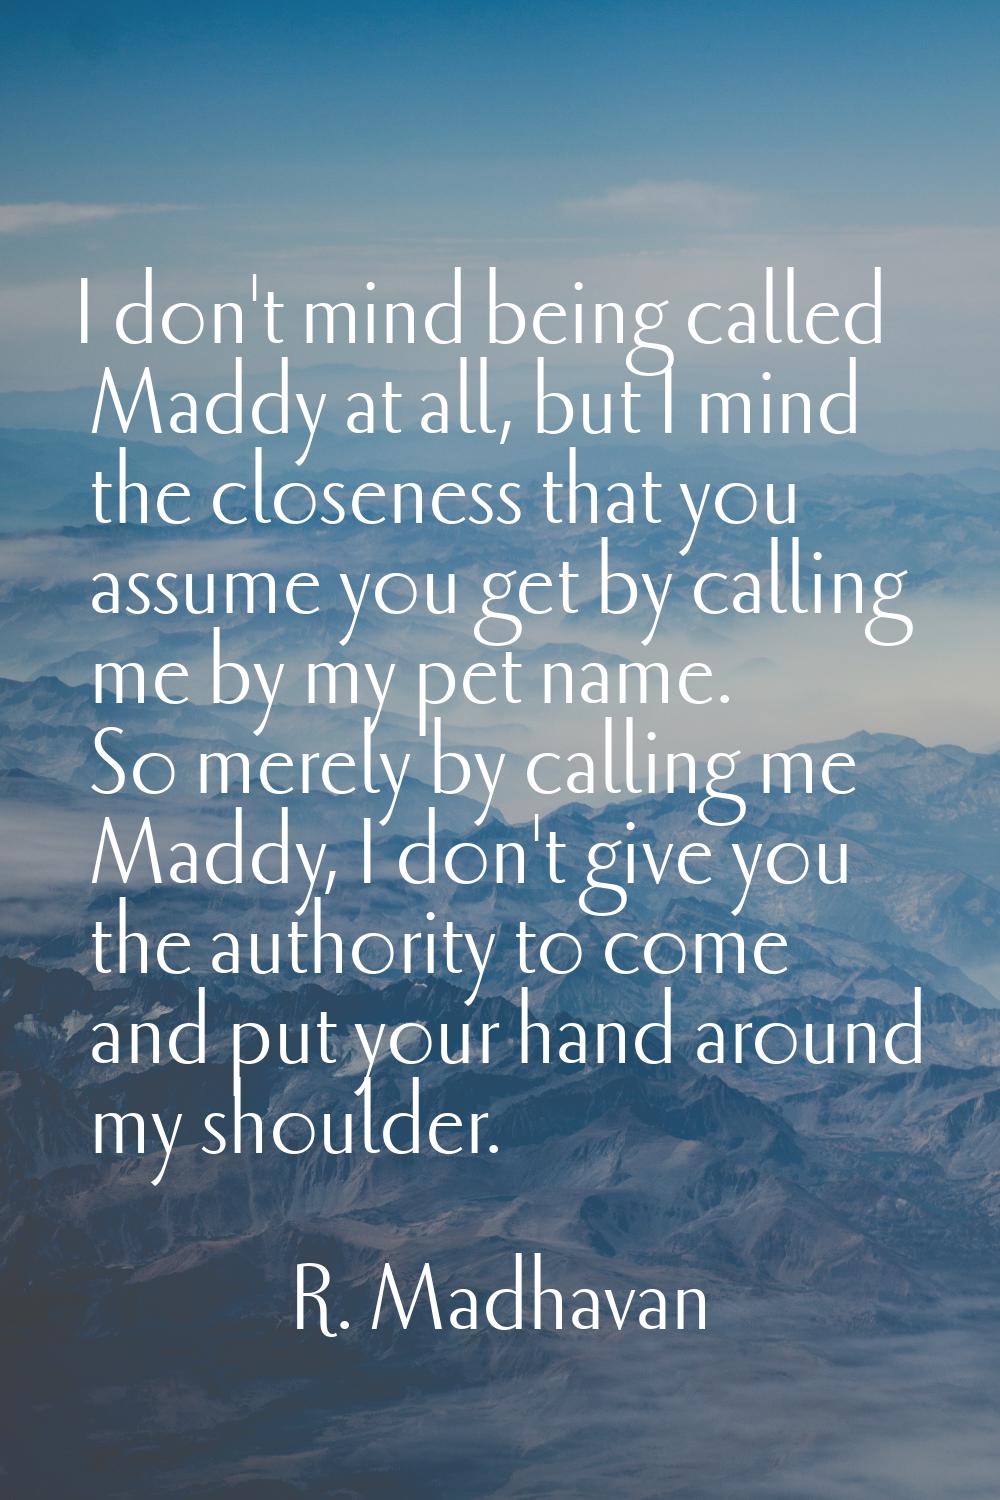 I don't mind being called Maddy at all, but I mind the closeness that you assume you get by calling